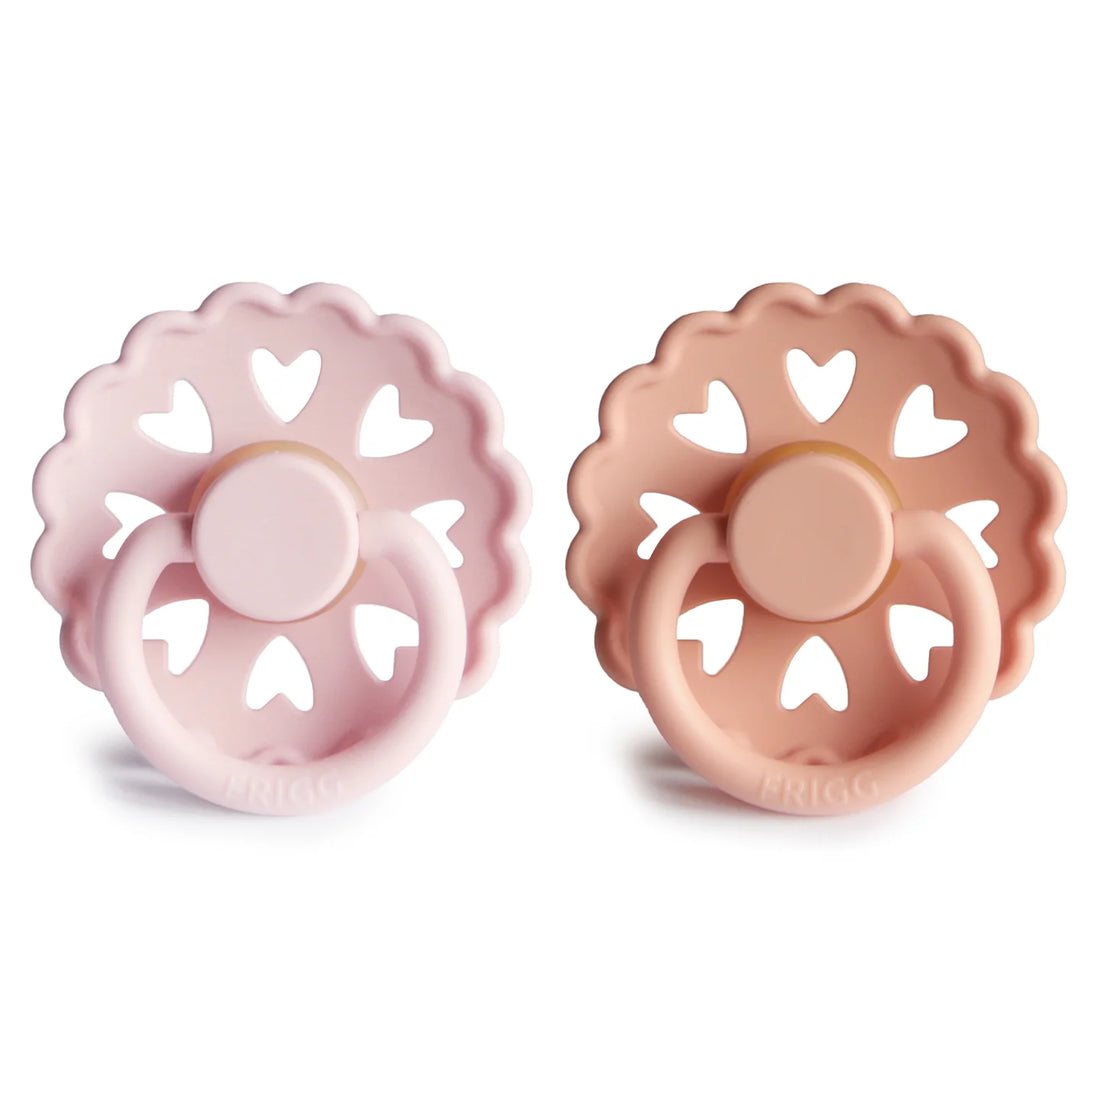 FRIGG ANDERSEN FAIRYTALE NATURAL RUBBER PACIFIER | WHITE LILAC/PRETTY IN PEACH | 2 PACK